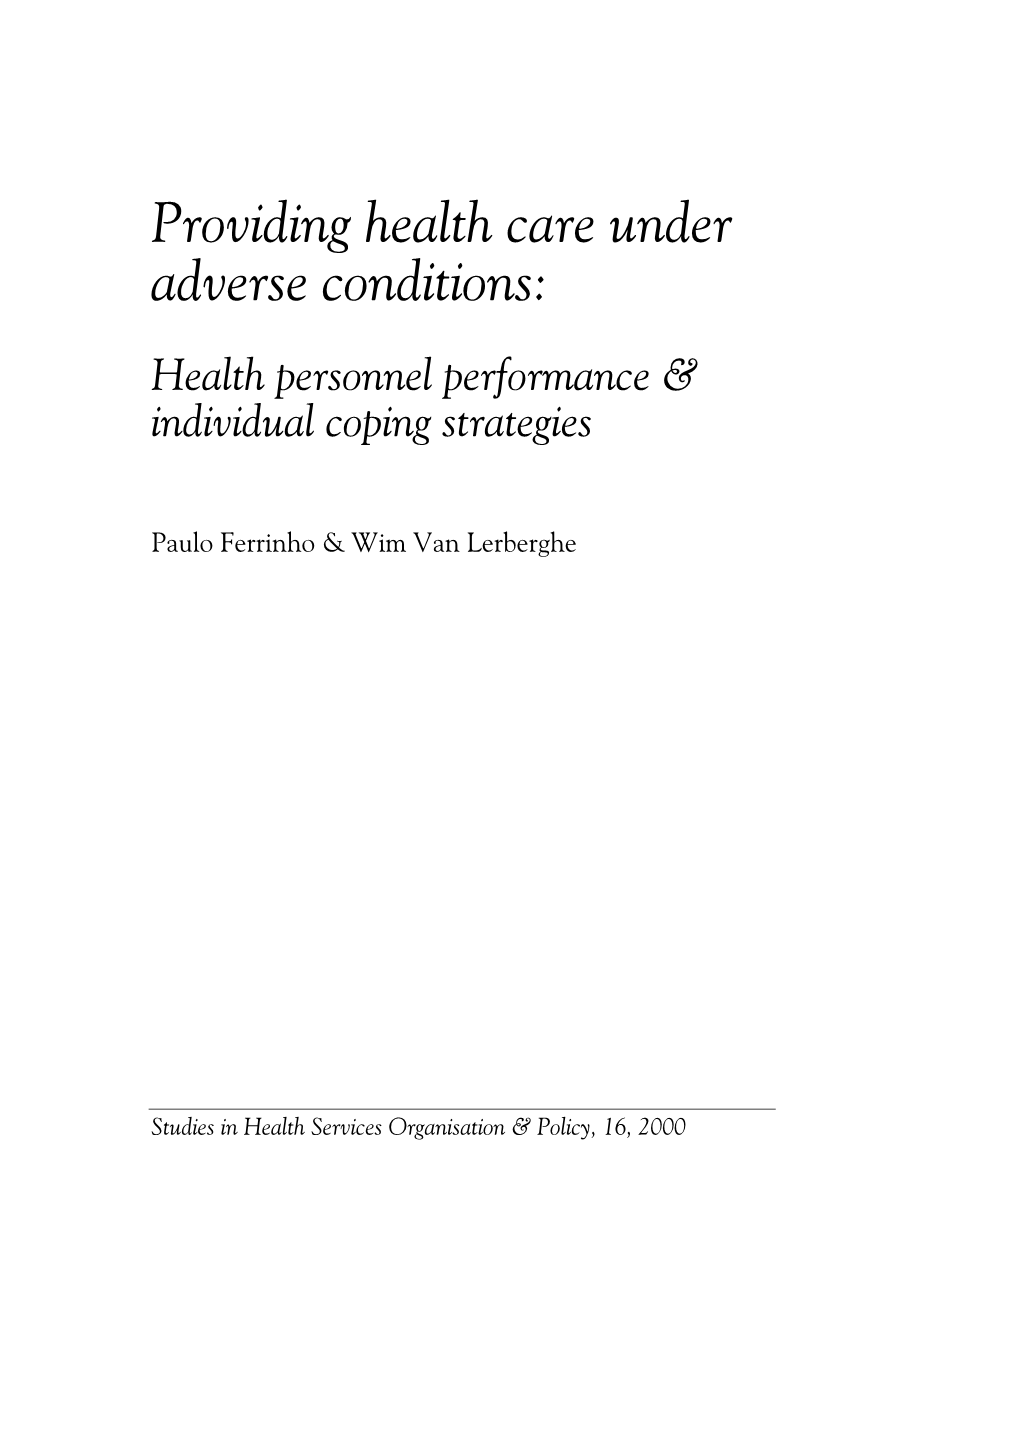 Providing Health Care Under Adverse Conditions: Health Personnel Performance & Individual Coping Strategies